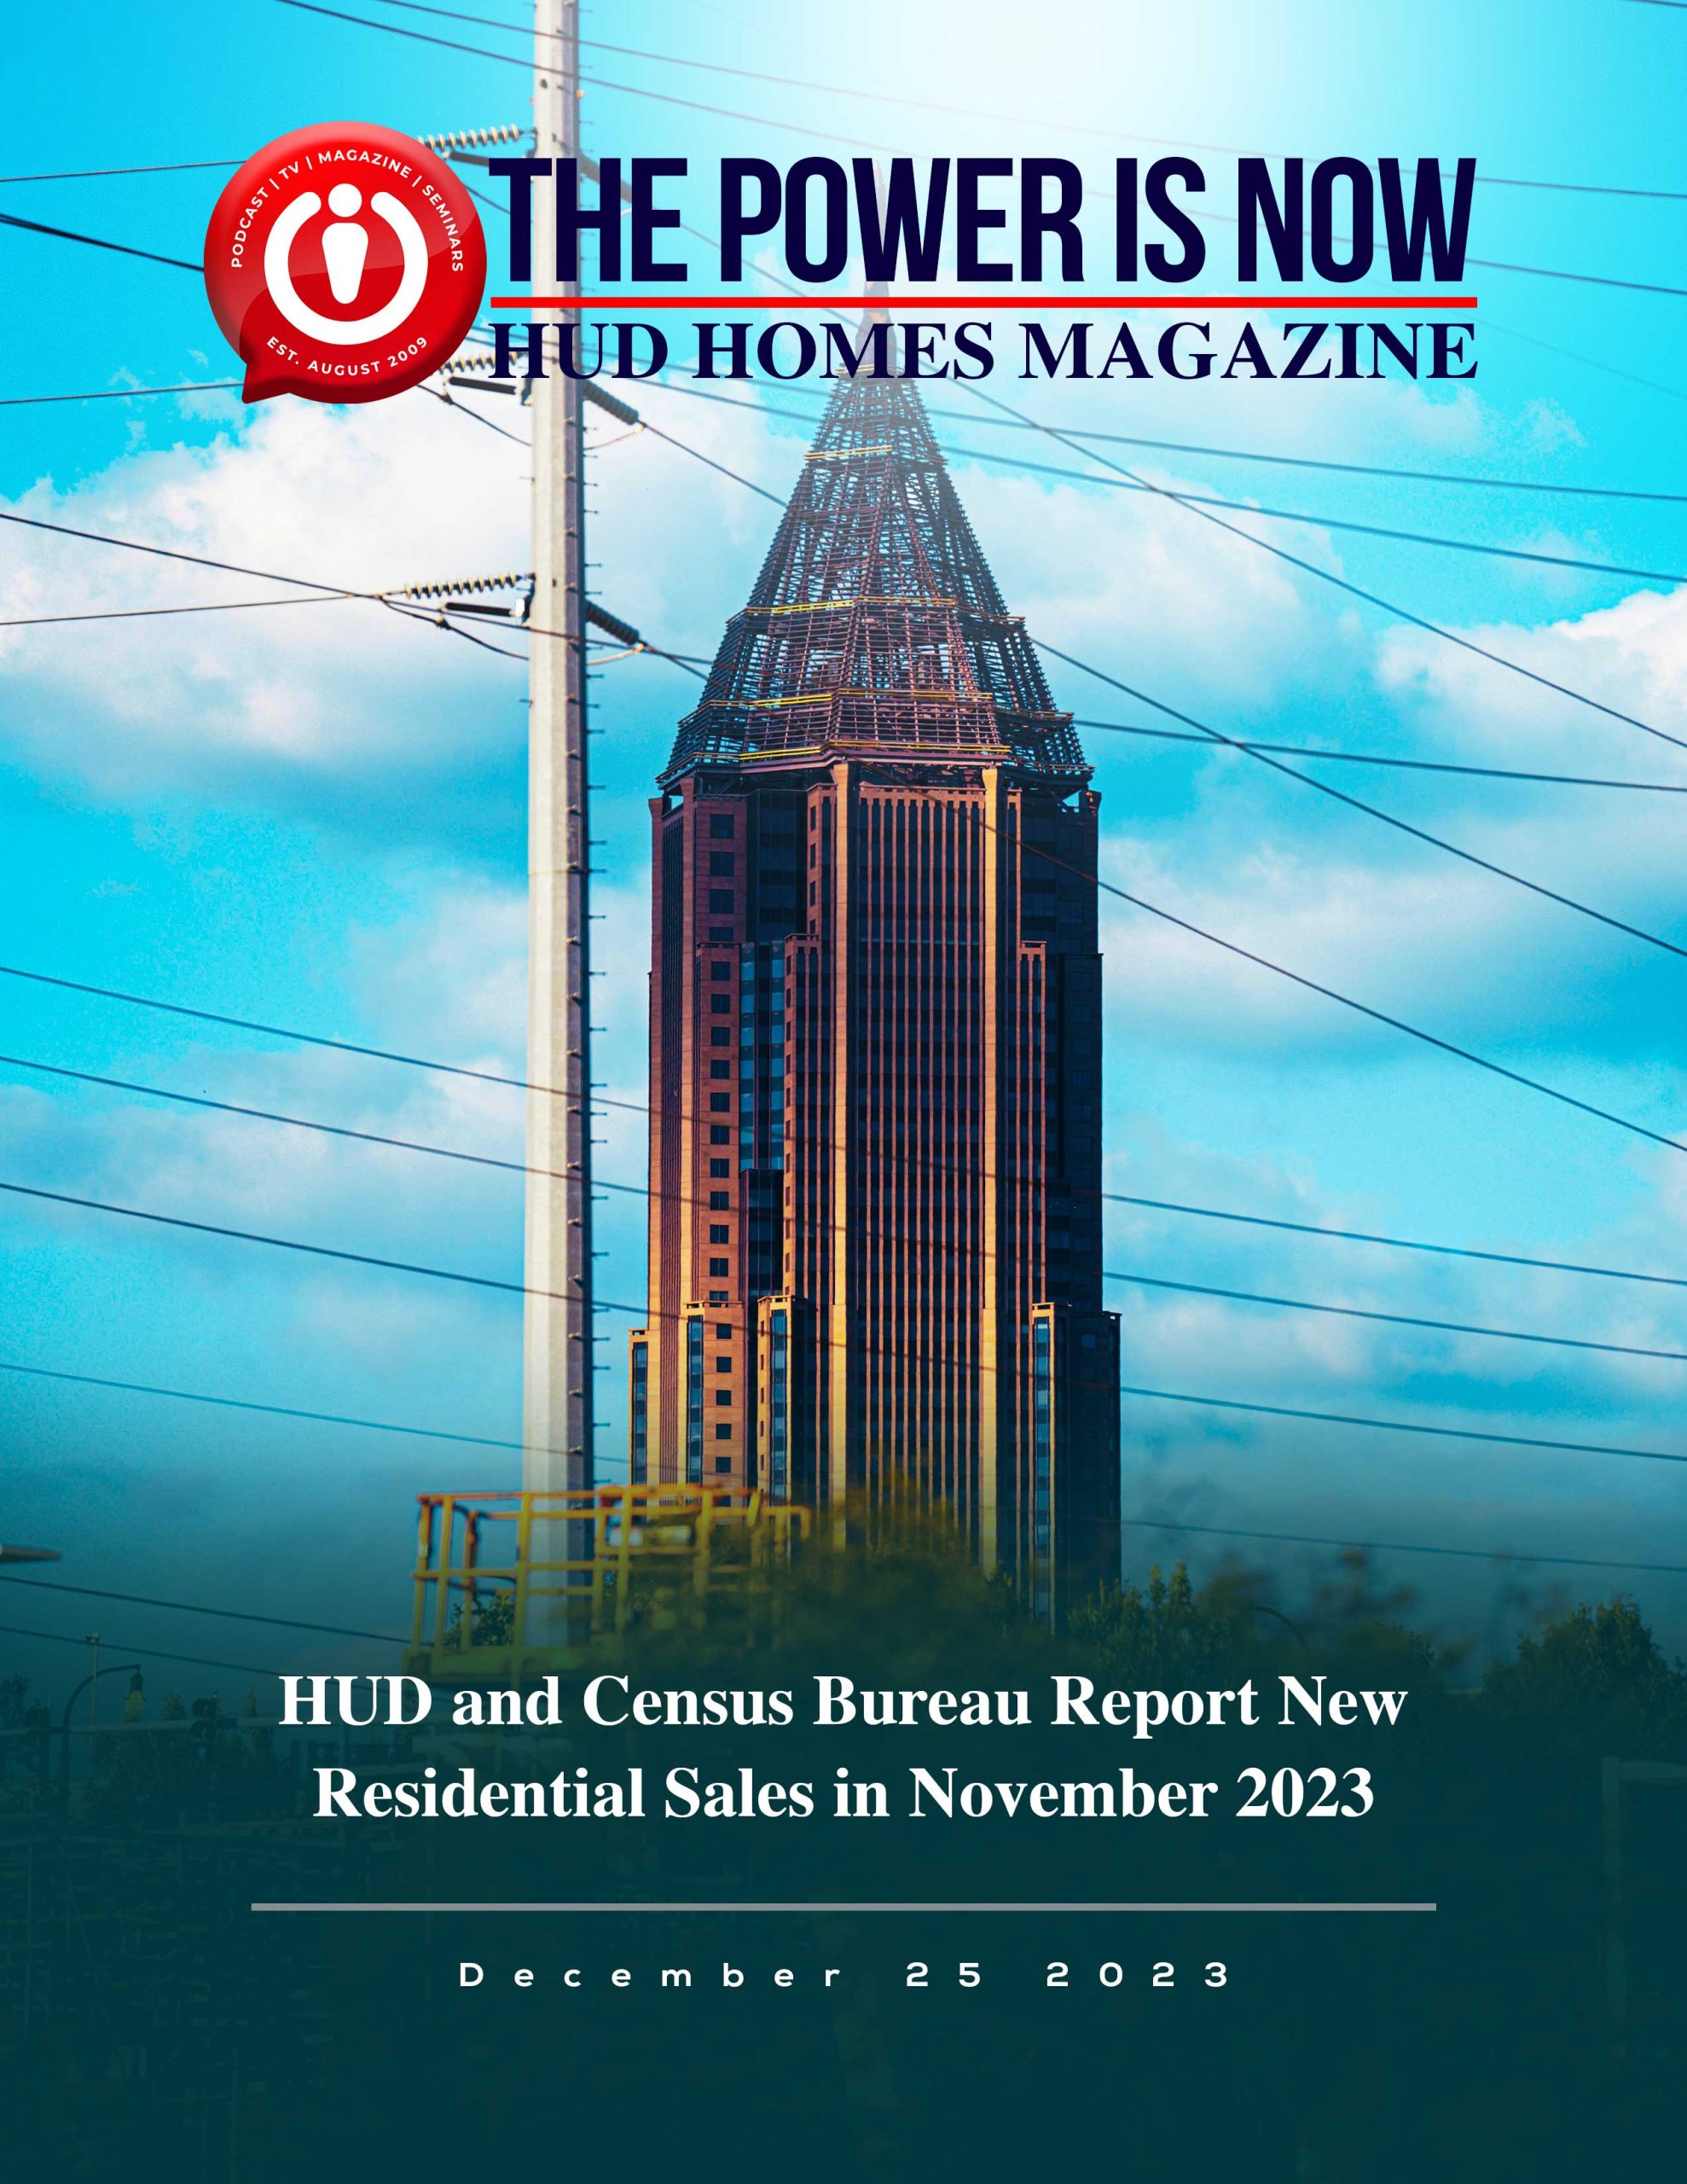 HUD AND CENSUS BUREAU REPORT NEW RESIDENTIAL SALES IN NOVEMBER 2023